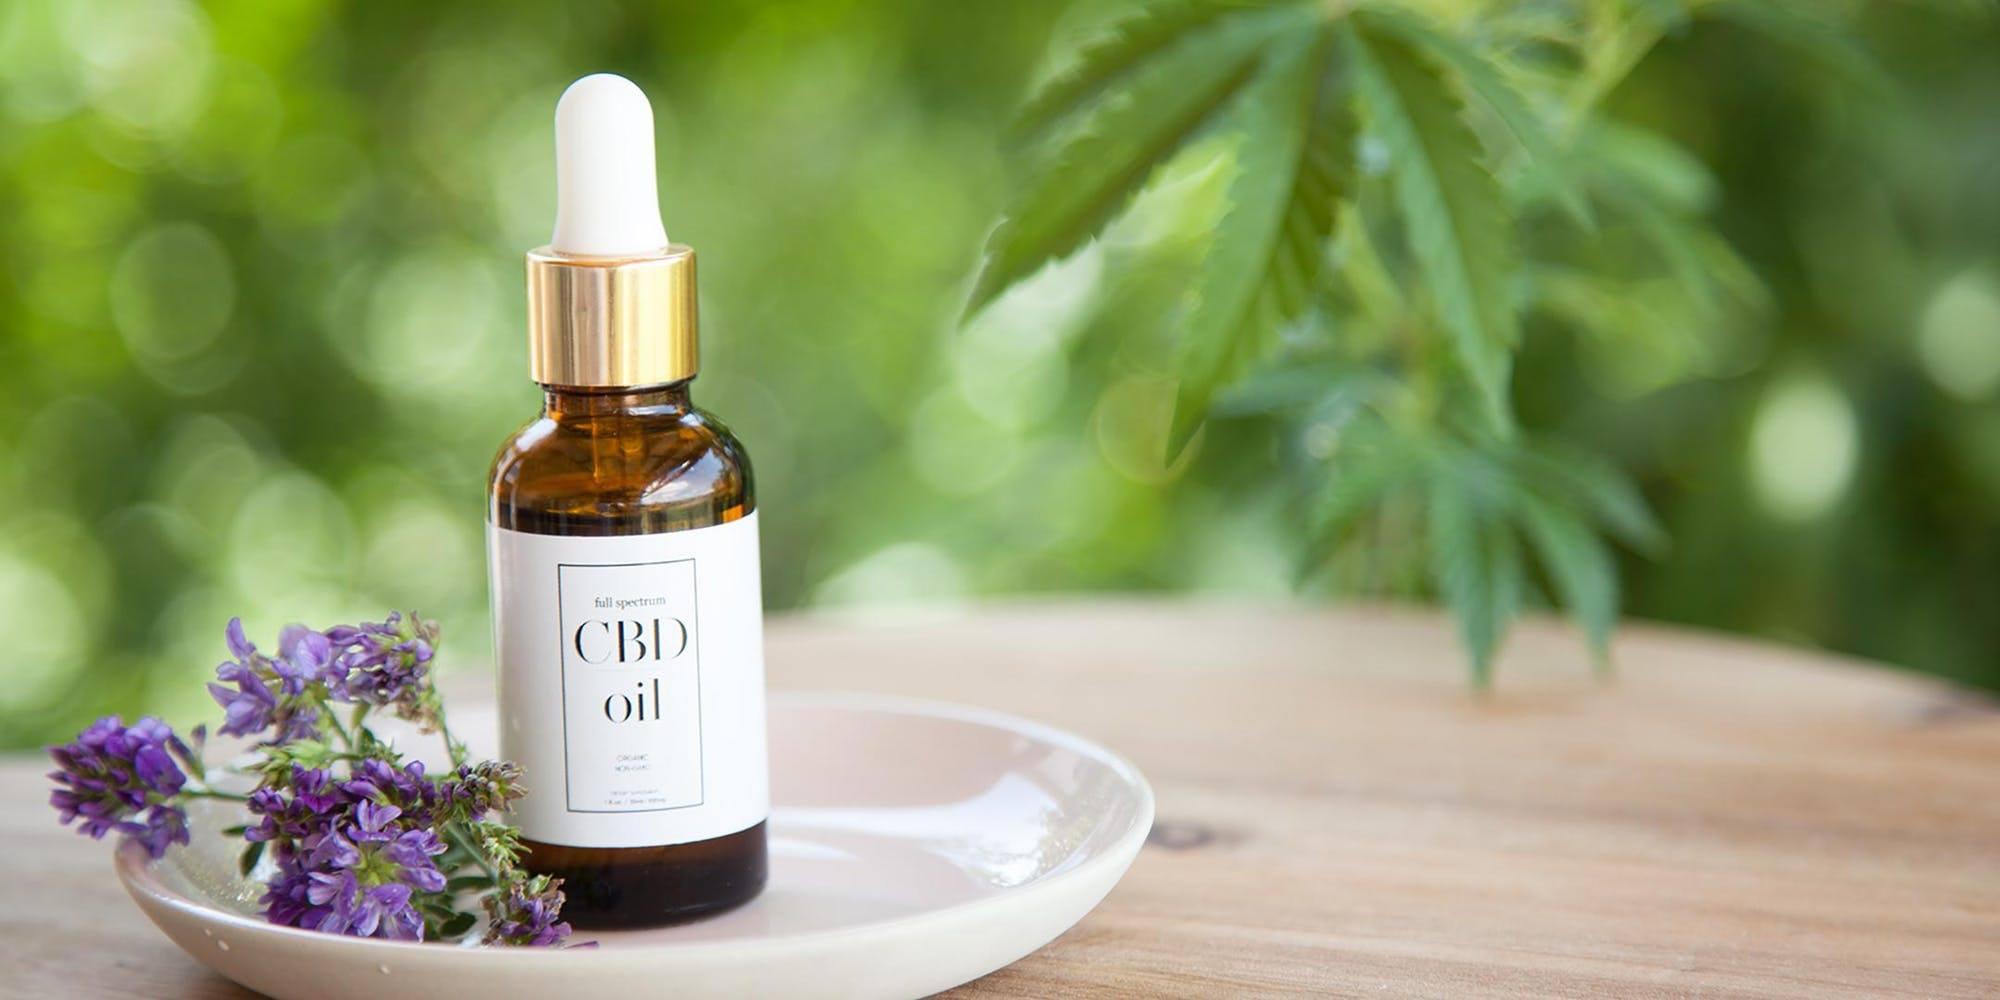 What’s the deal with CBD?